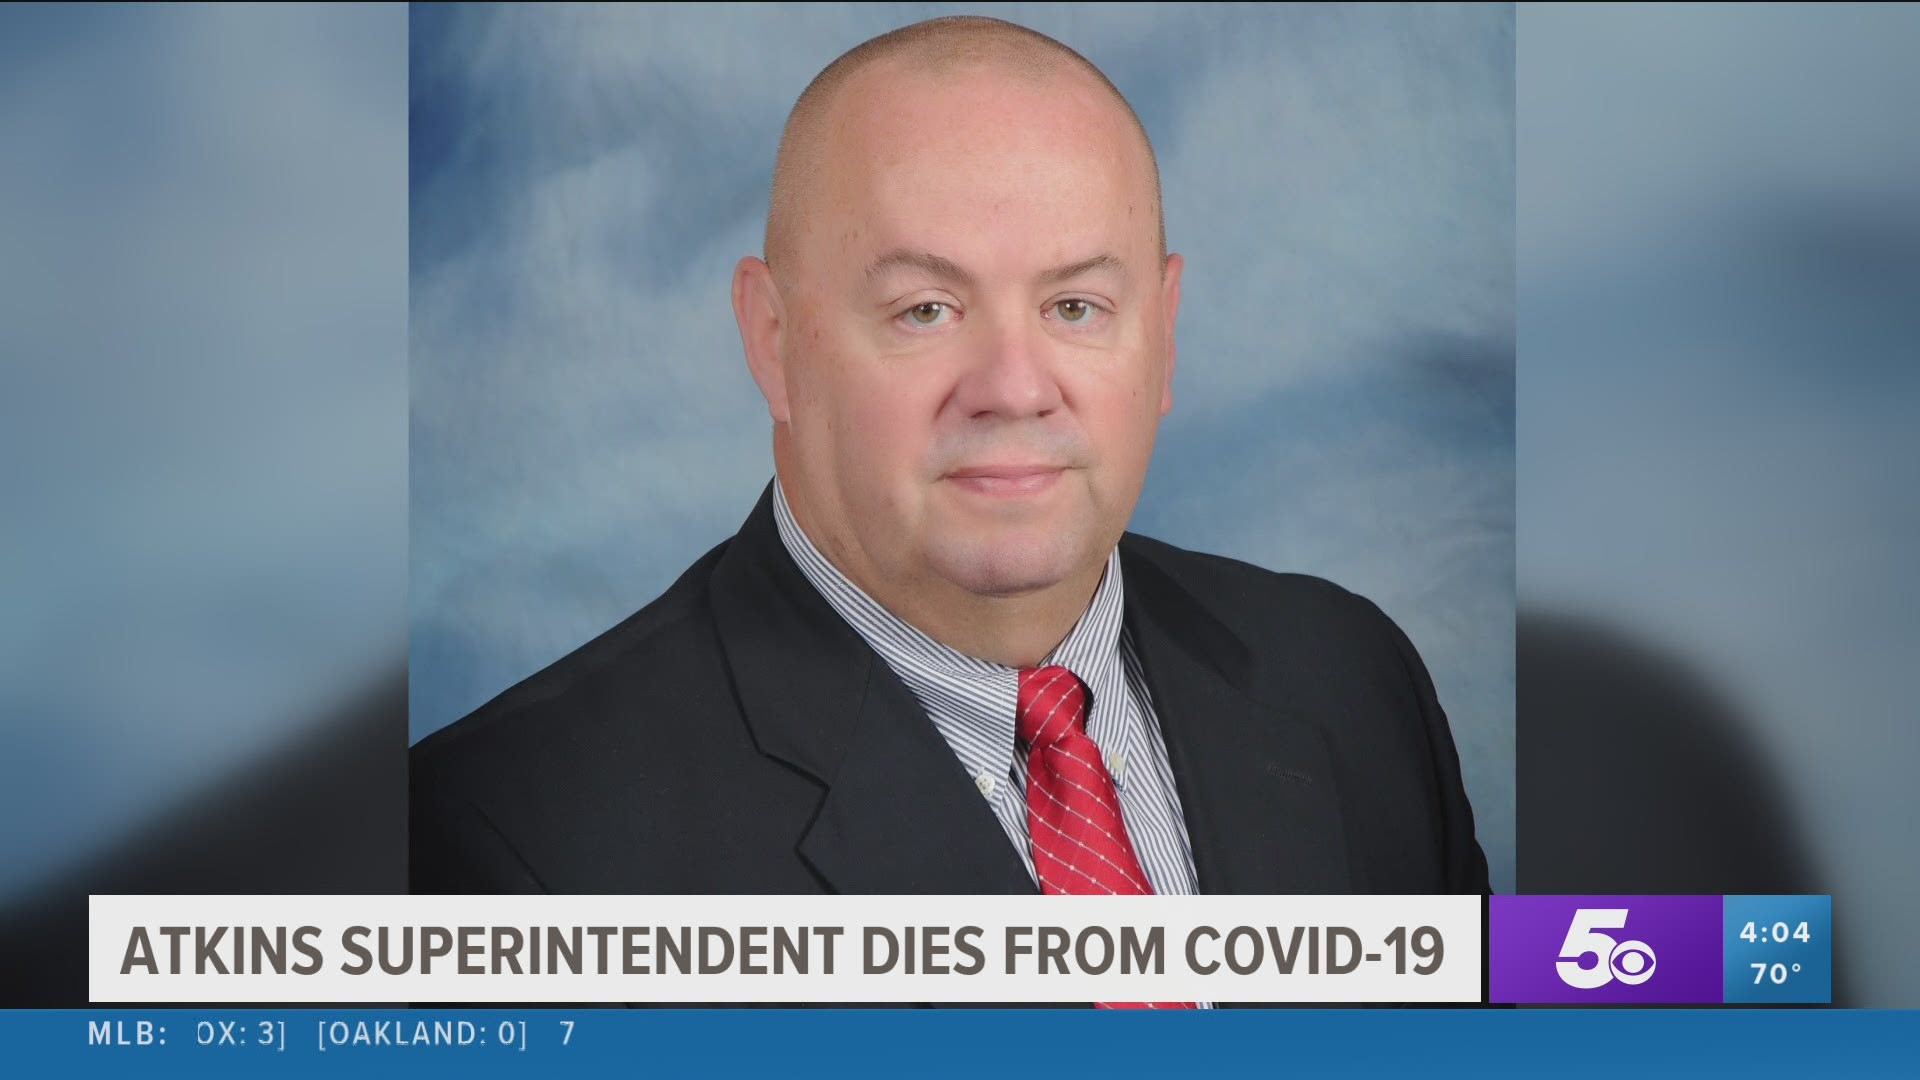 Atkins Public Schools Superintendent Jody Jenkins passed away Sept. 29 due to complications from COVID-19. https://bit.ly/33by5oB